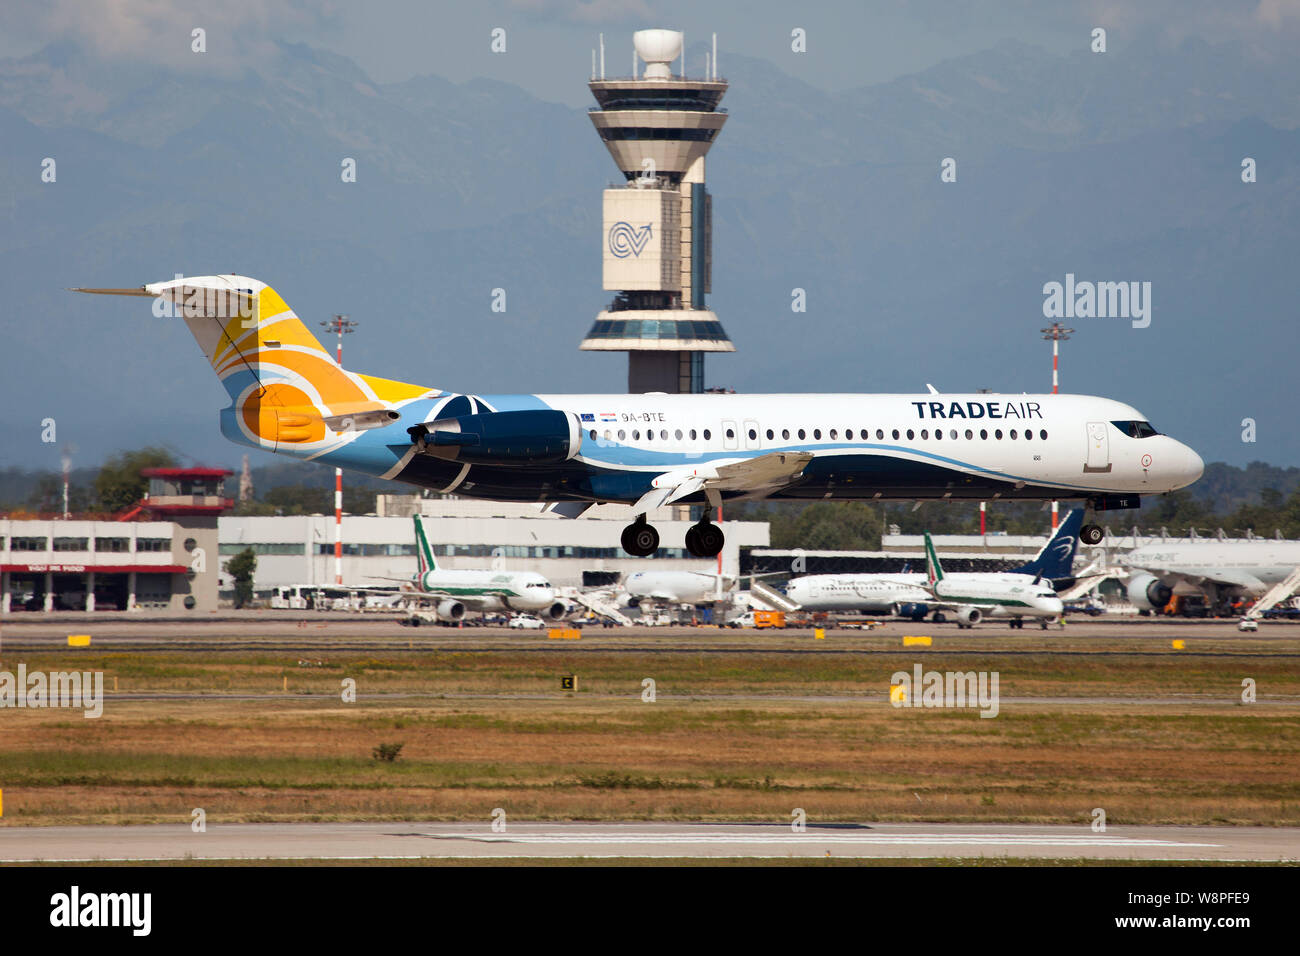 Milan, Italy. 3rd Aug, 2019. A Trade Air Fokker 100 flying on behalf of Air Italy due to the grounding of Boeing 737-800 MAXs, here seen landing at Milan Malpensa airport. Credit: Fabrizio Gandolfo/SOPA Images/ZUMA Wire/Alamy Live News Stock Photo